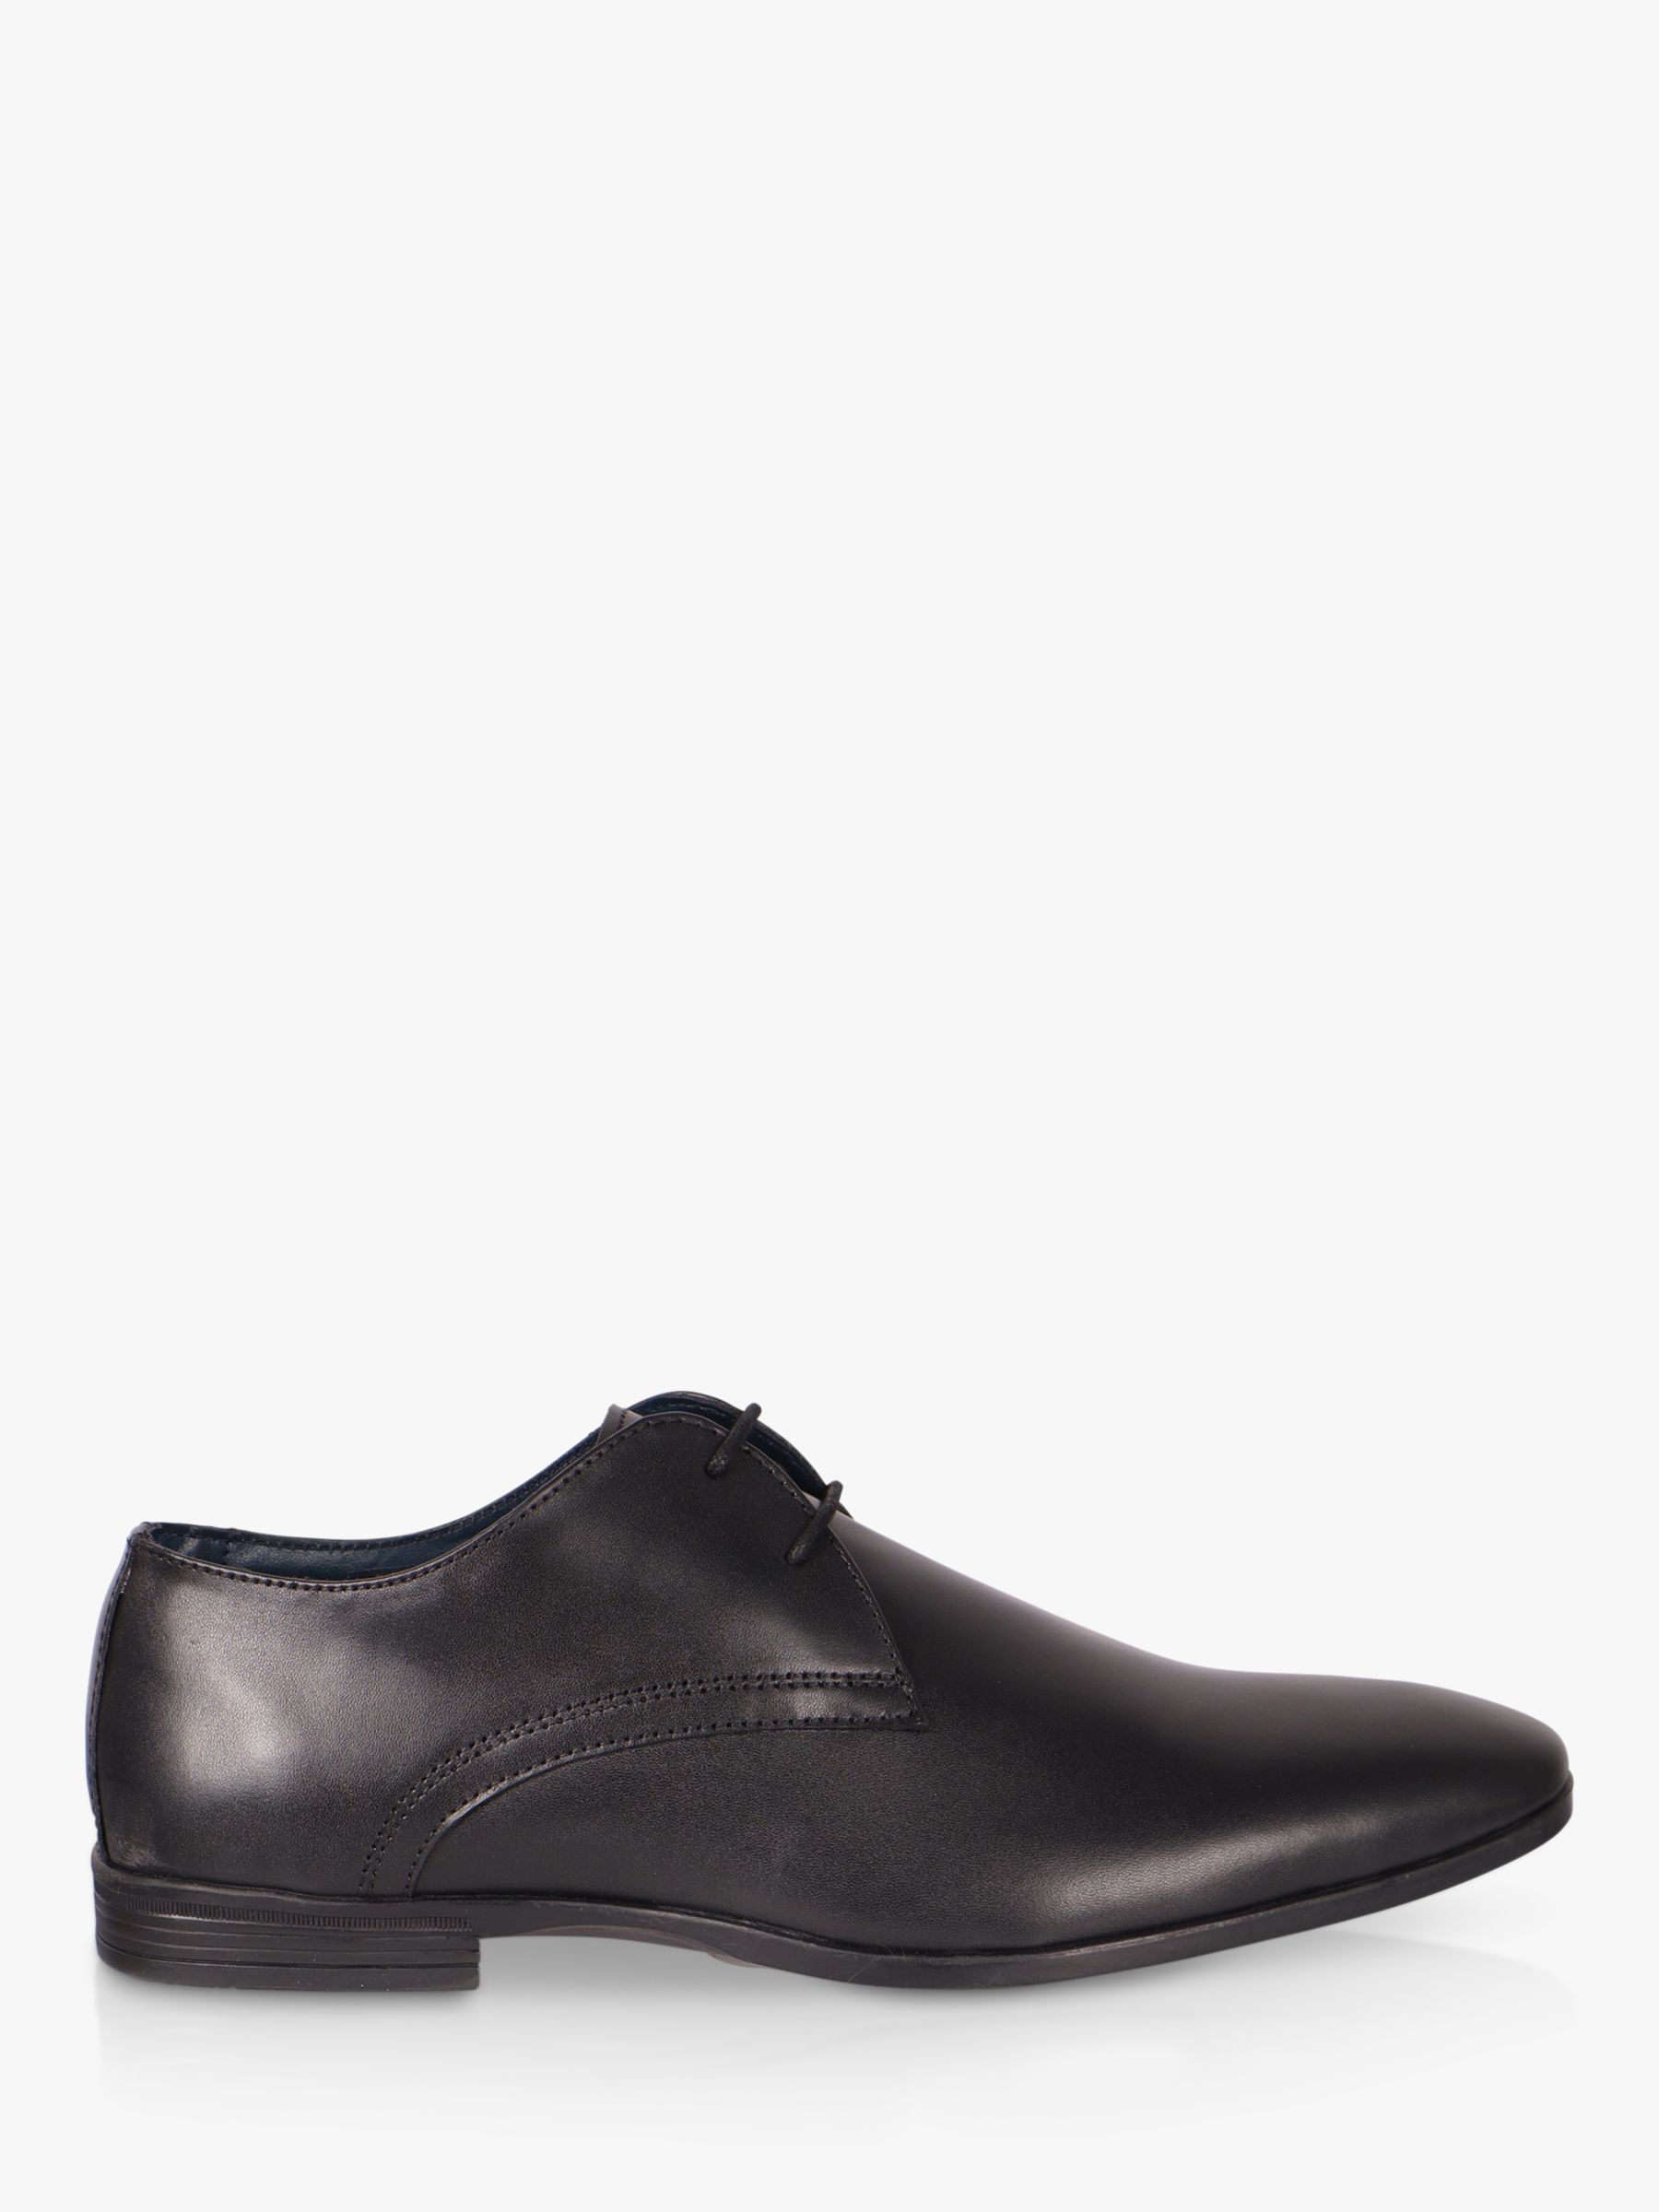 Silver Street London Craven Leather Brogues, Black at John Lewis & Partners